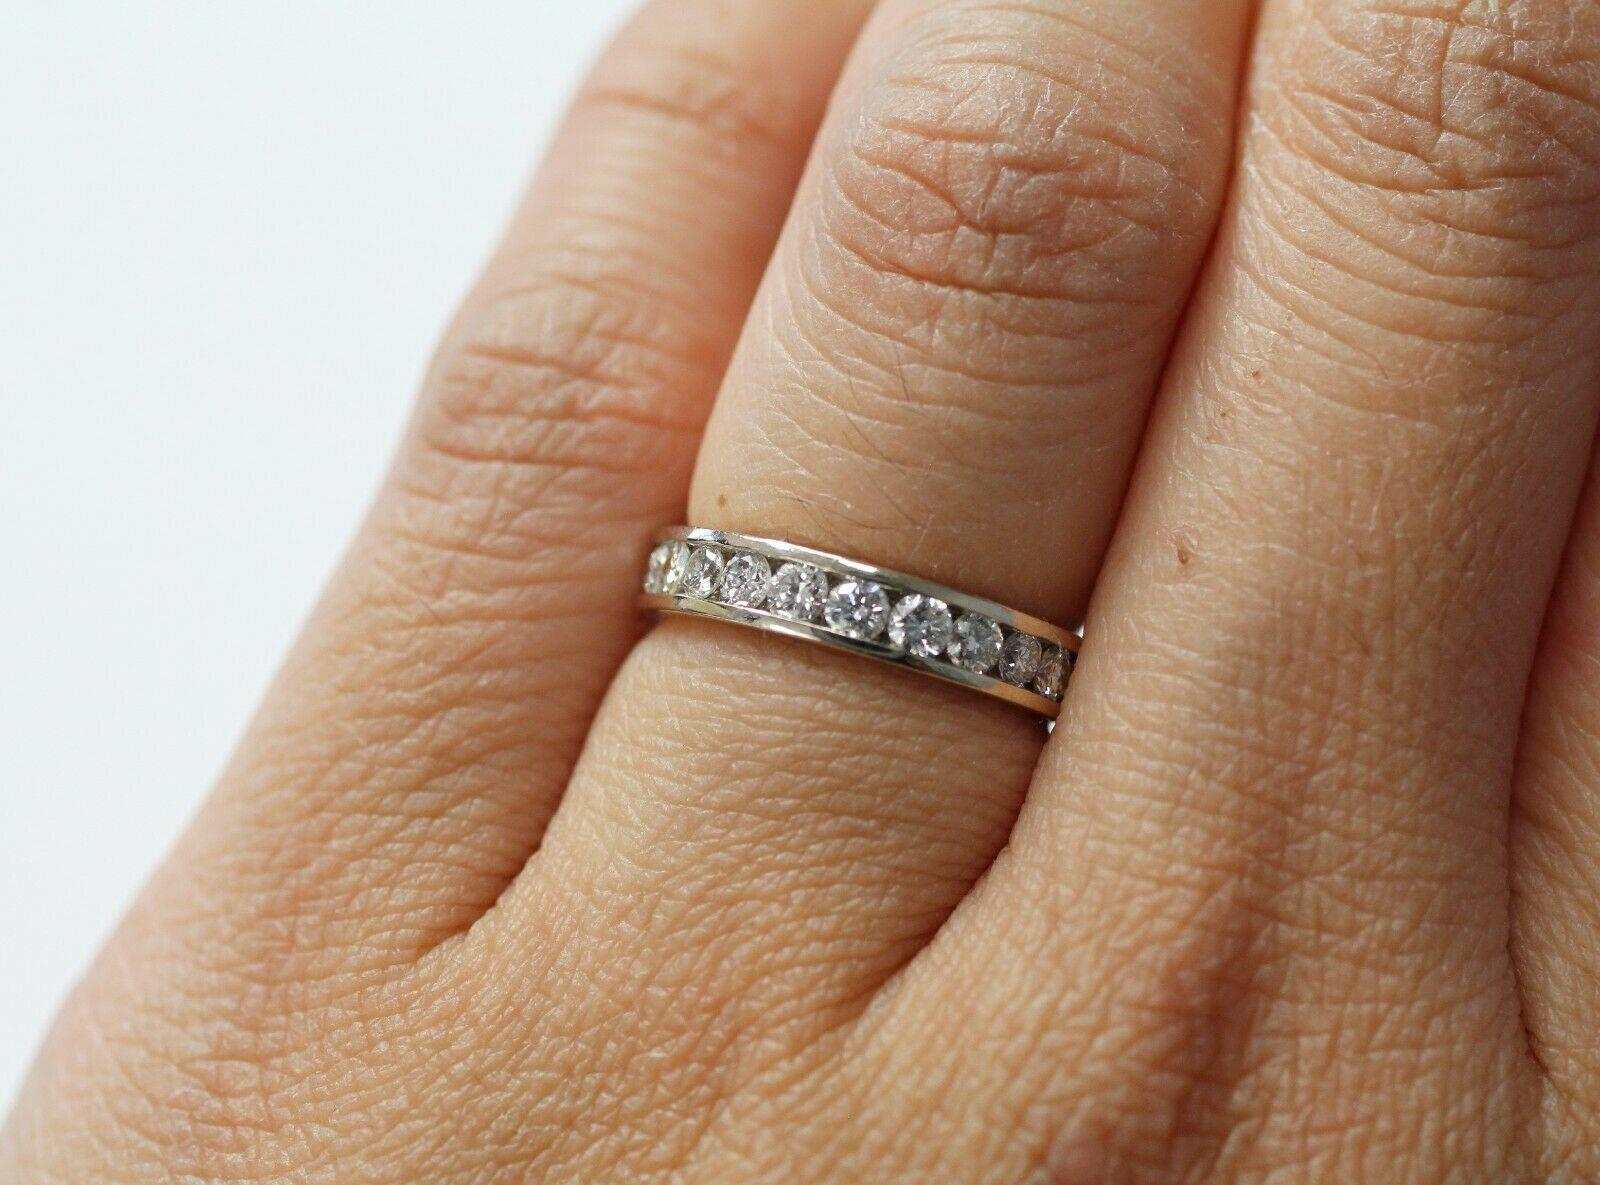 14 Karat White Gold Diamond Wedding Ring In Excellent Condition For Sale In Los Angeles, CA